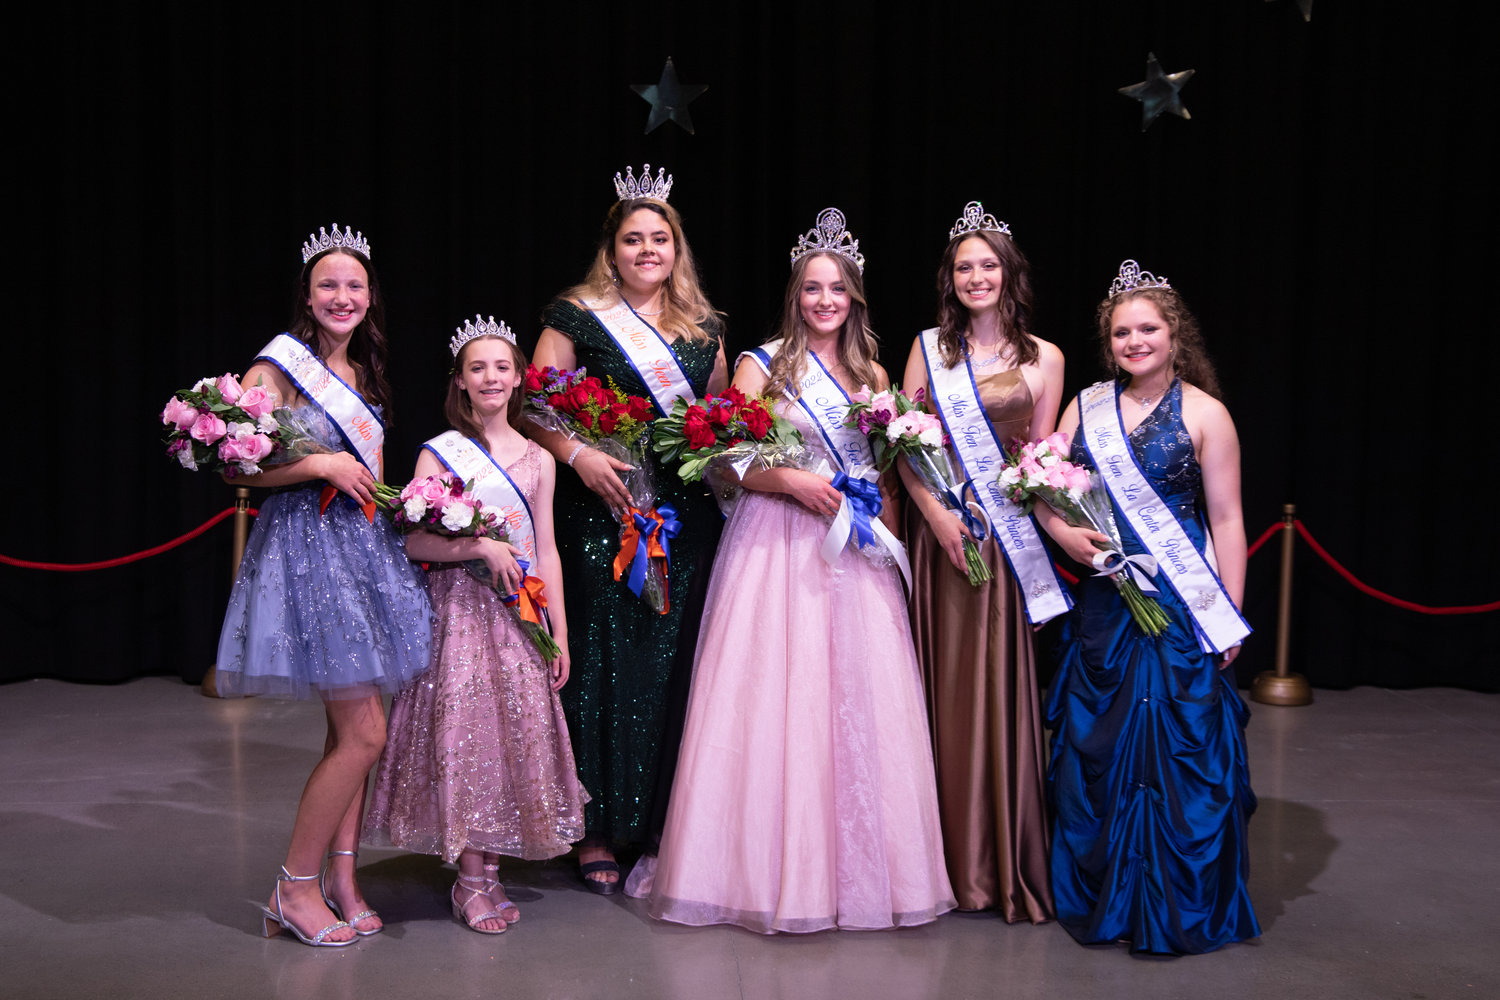 After two years, the 18th annual Miss Teen La Center Pageant took place on Saturday, July 23, at La Center Middle School. This year, titles were added for participants from Ridgefield. From left to right:  Miss Teen Ridgefield Princess Alea Merwin, Miss Teen Ridgefield Princess Savannah Riley, Miss Teen Ridgefield Viveca Johnson, Miss Teen La Center Caitlin Daniels, Miss Teen La Center Princess Kylee Mills and Miss Teen La Center Princess Adrionna McClellan.